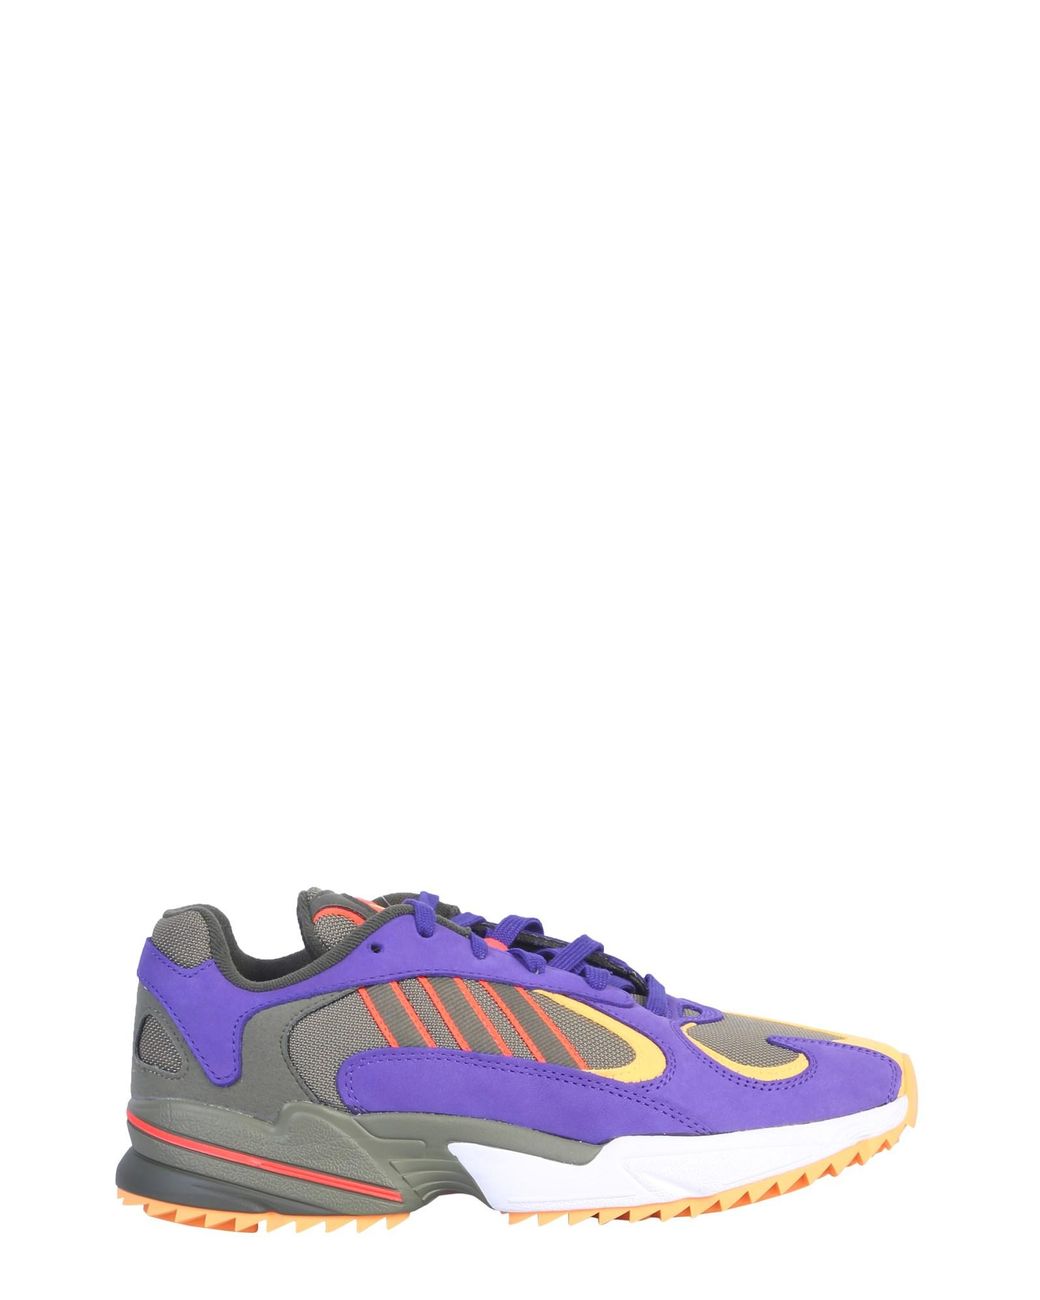 adidas Originals Green And Purple Yung-1 Trail Sneakers for Men - Save 36%  | Lyst